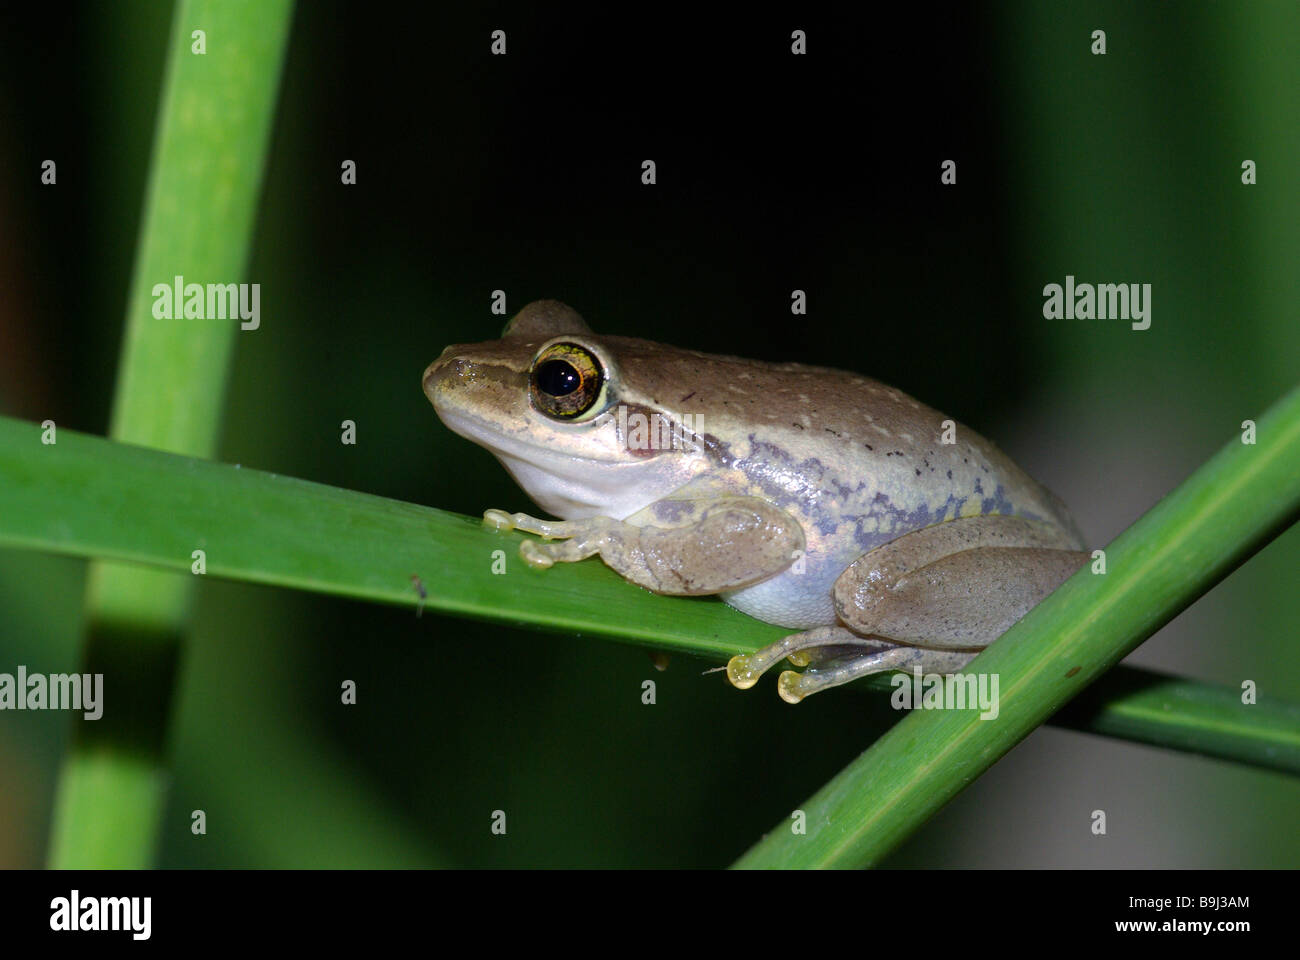 Dumeril's Bright-eyed Frog (Boophis tephraeomystax) perched on a reed at Anjajavy, Madagascar. Stock Photo